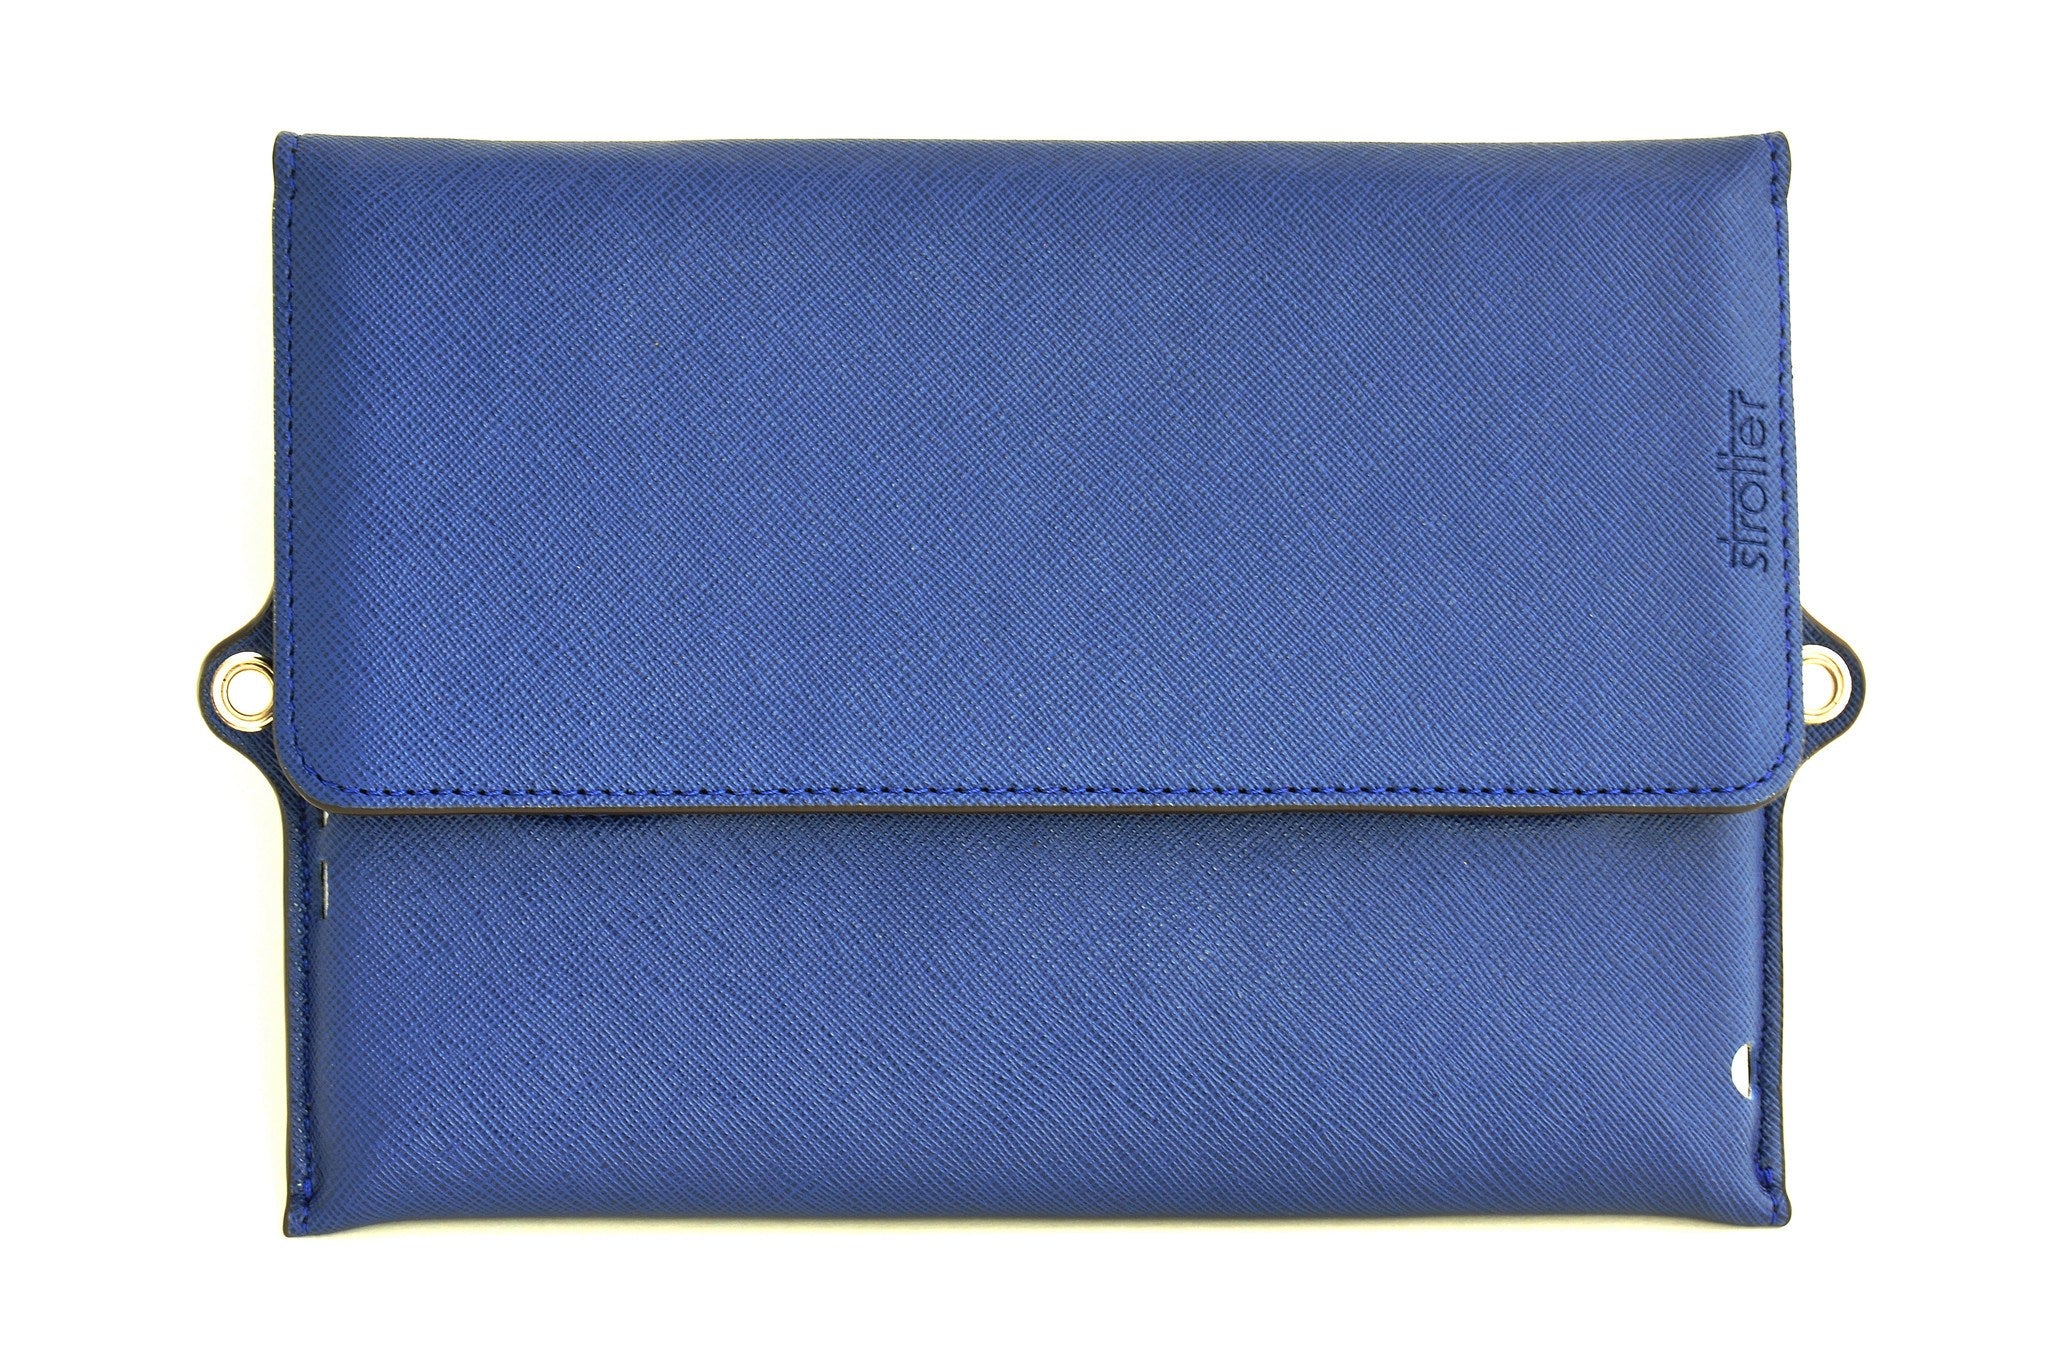 Case for iPad Mini - Across SL (synthetic leather) in Navy Blue.